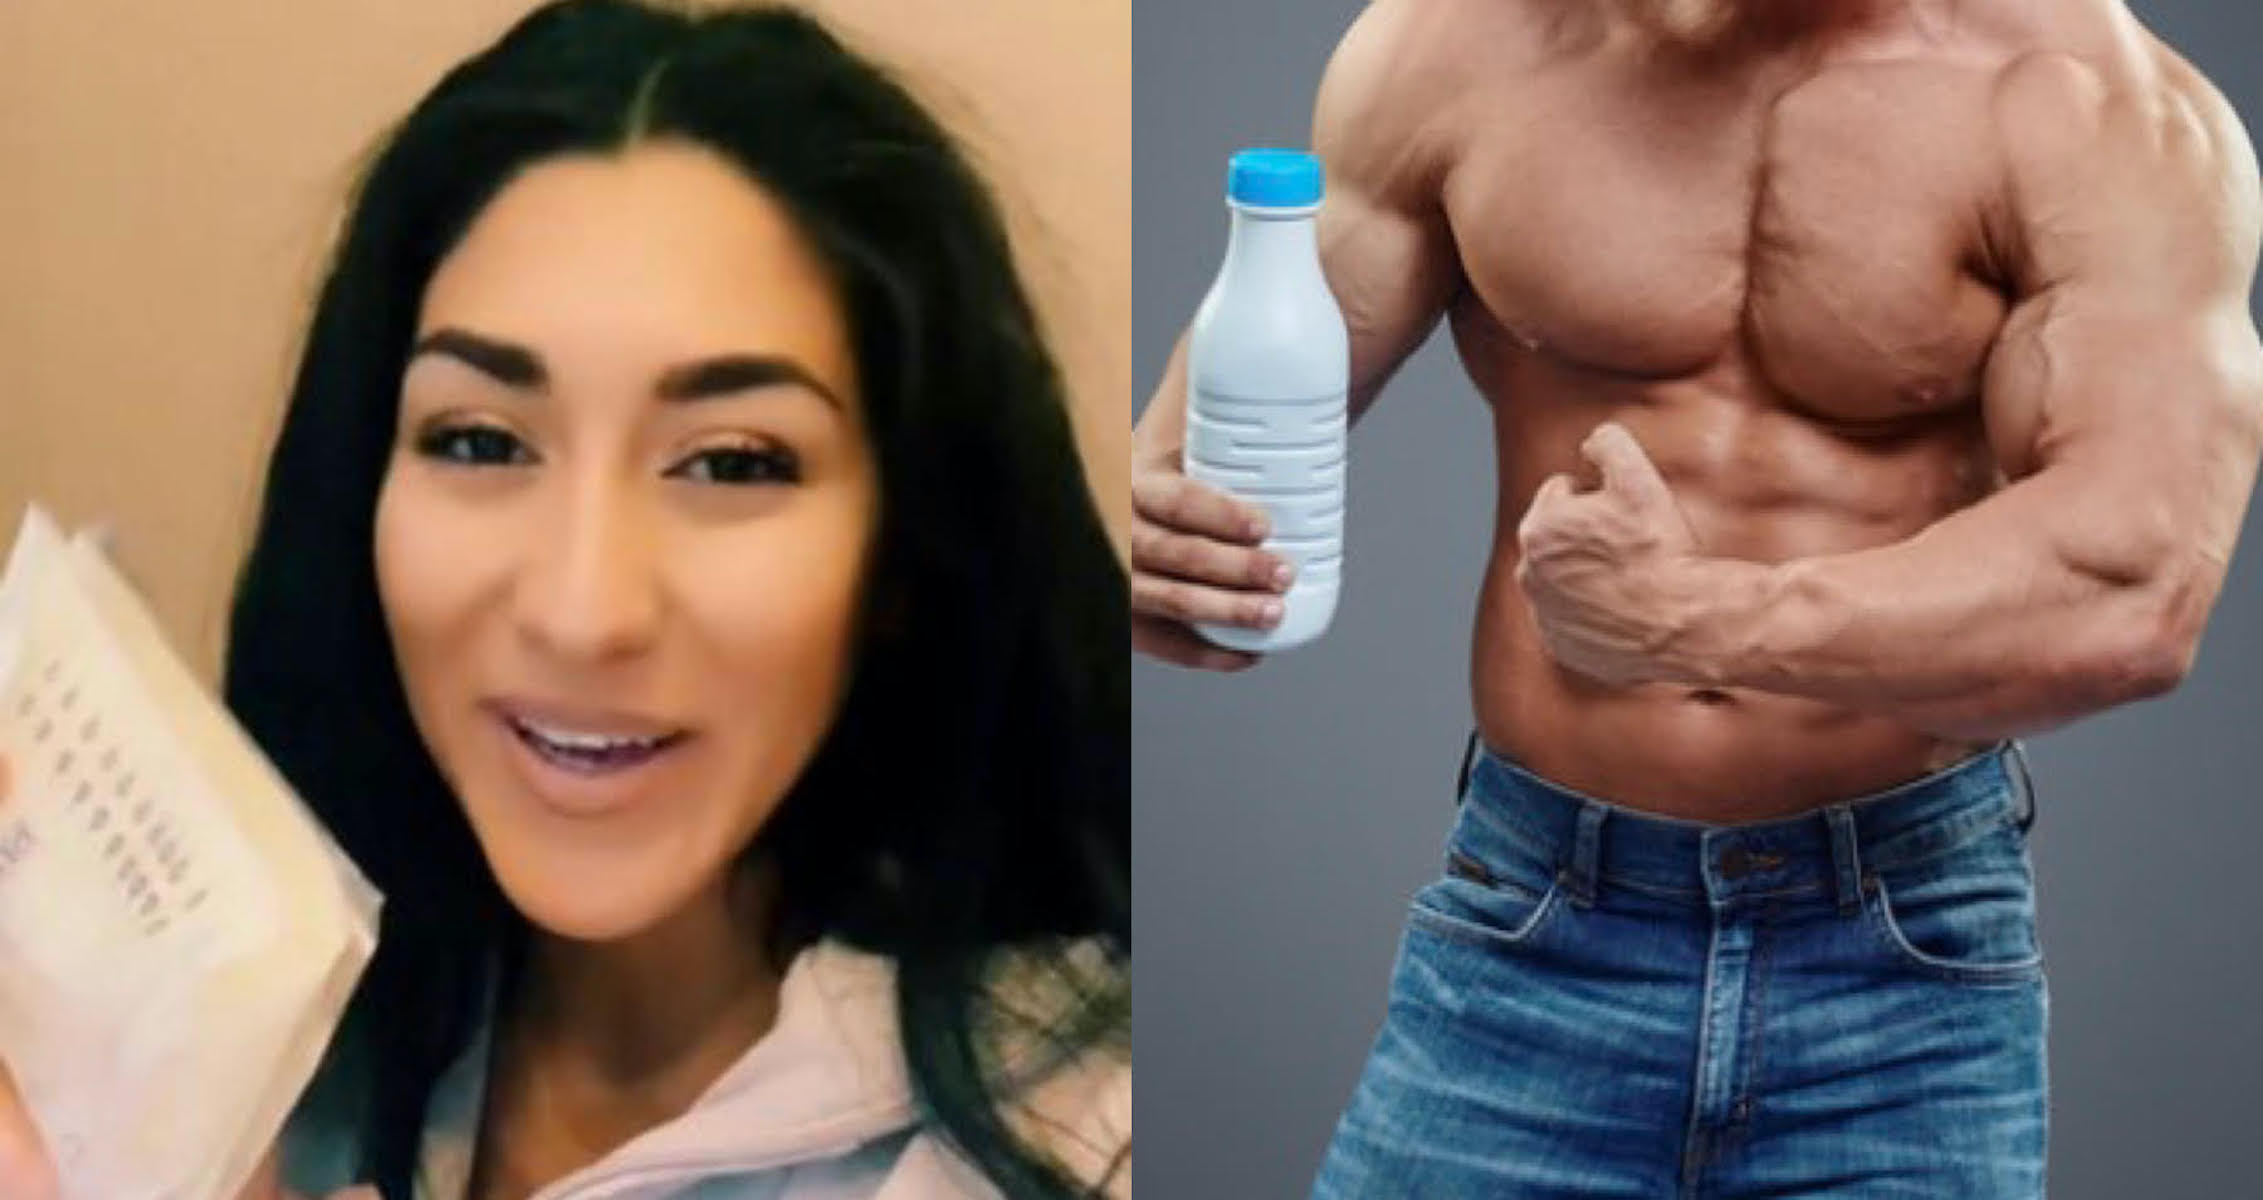 Woman Makes Over $13,000 Selling Breast Milk To Bodybuilders